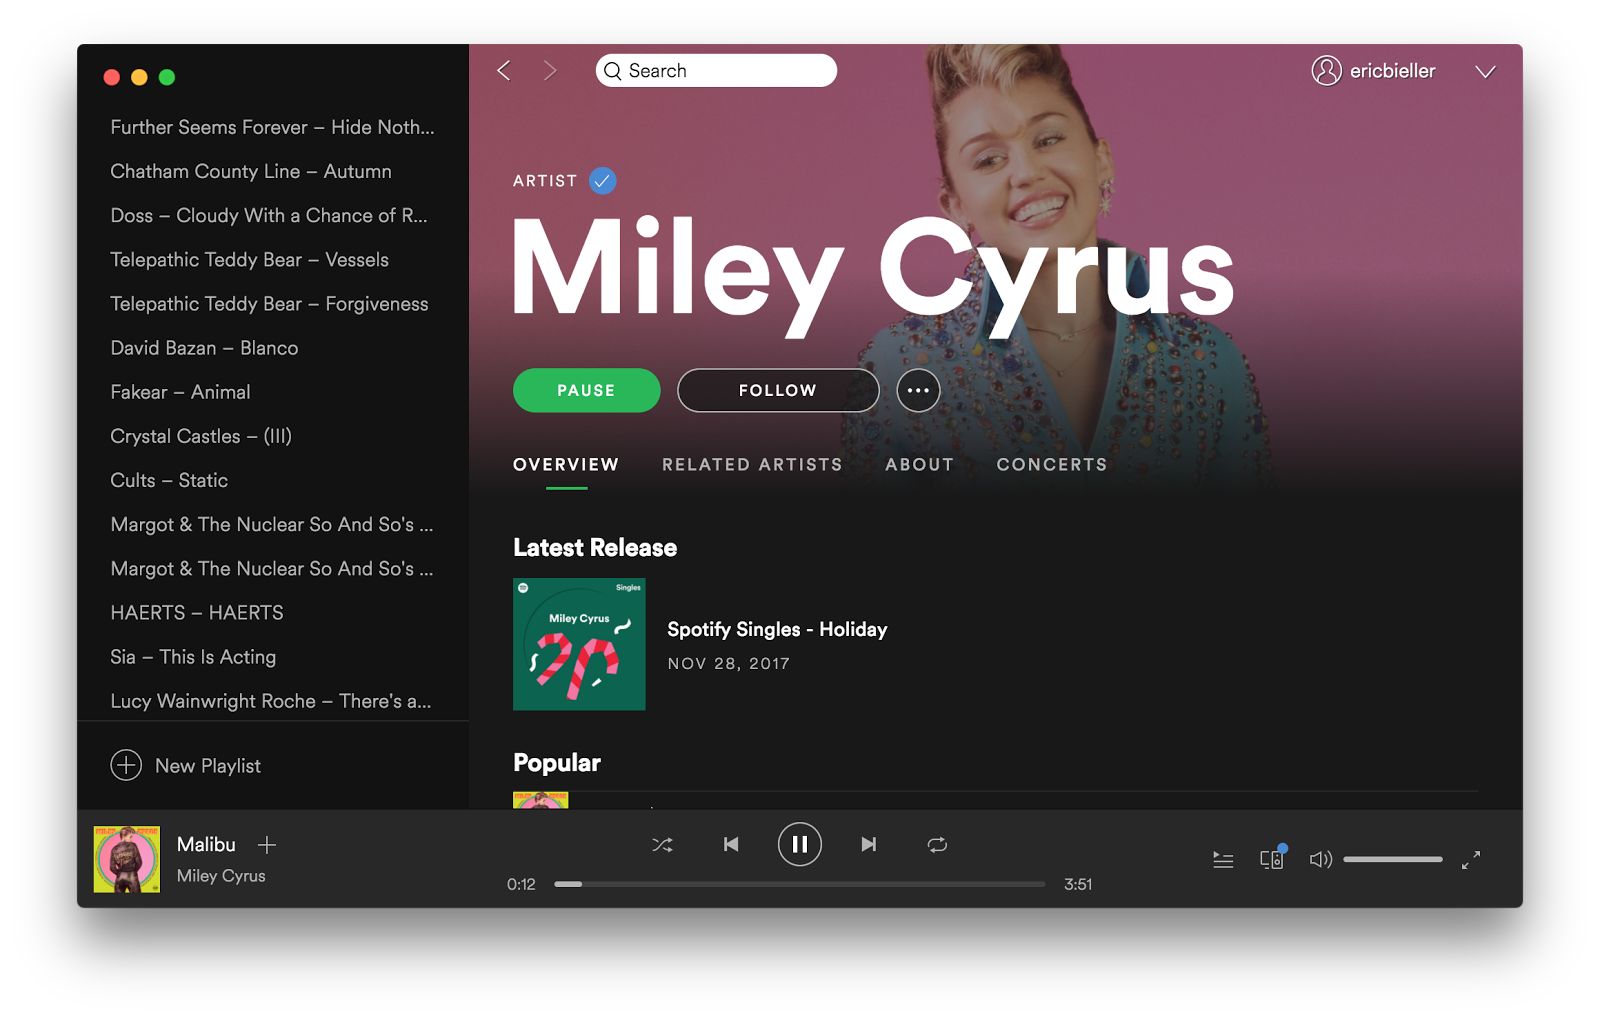 Miley Cyrus' artist page on Spotify